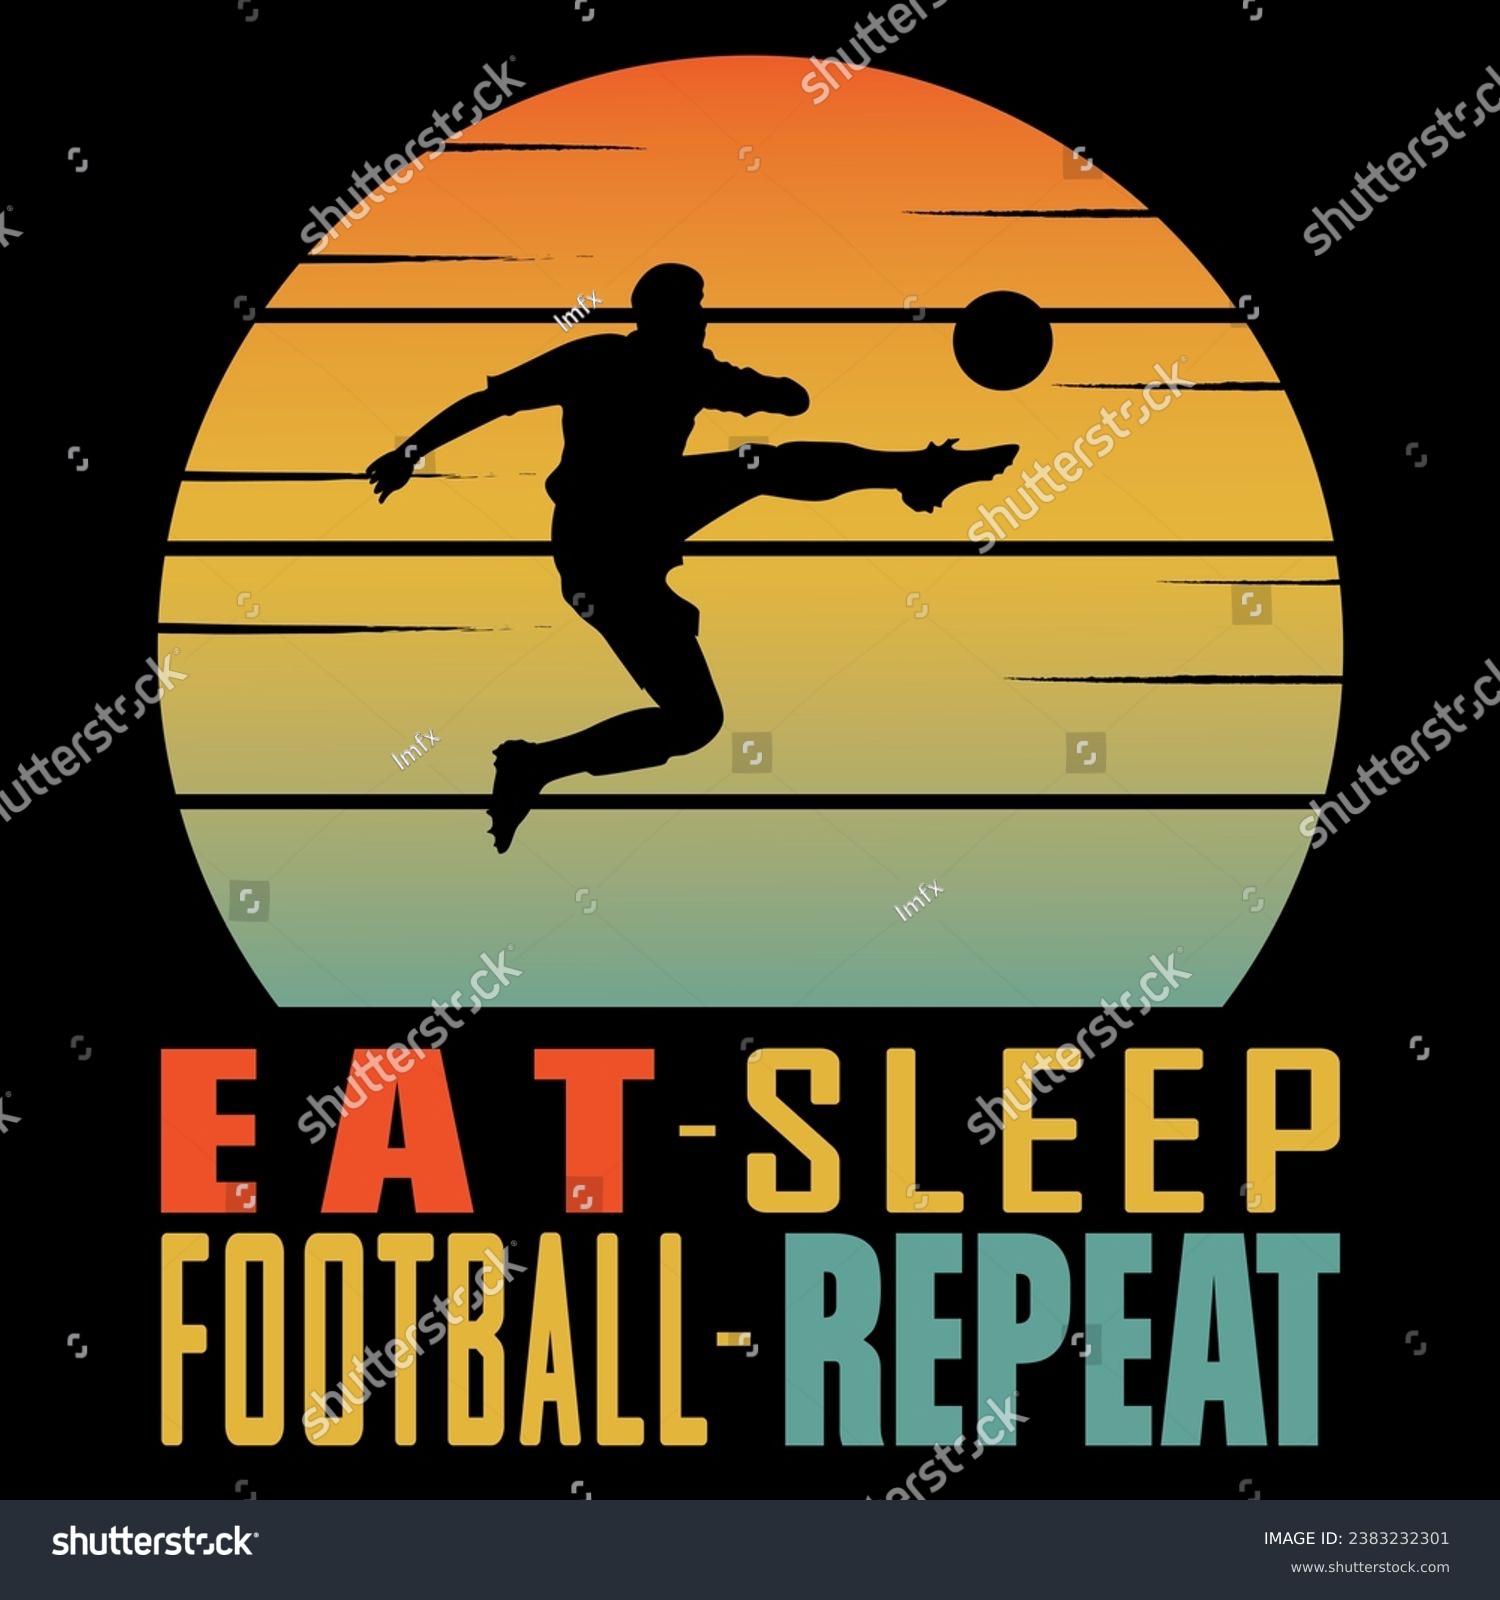 SVG of Fuel your love for the beautiful game with our 'Eat, Sleep, football, Repeat' typography illustration. #eat #sleep #football #repeat #design #illustration #artwork #vector #jersey #print #orange #gold svg